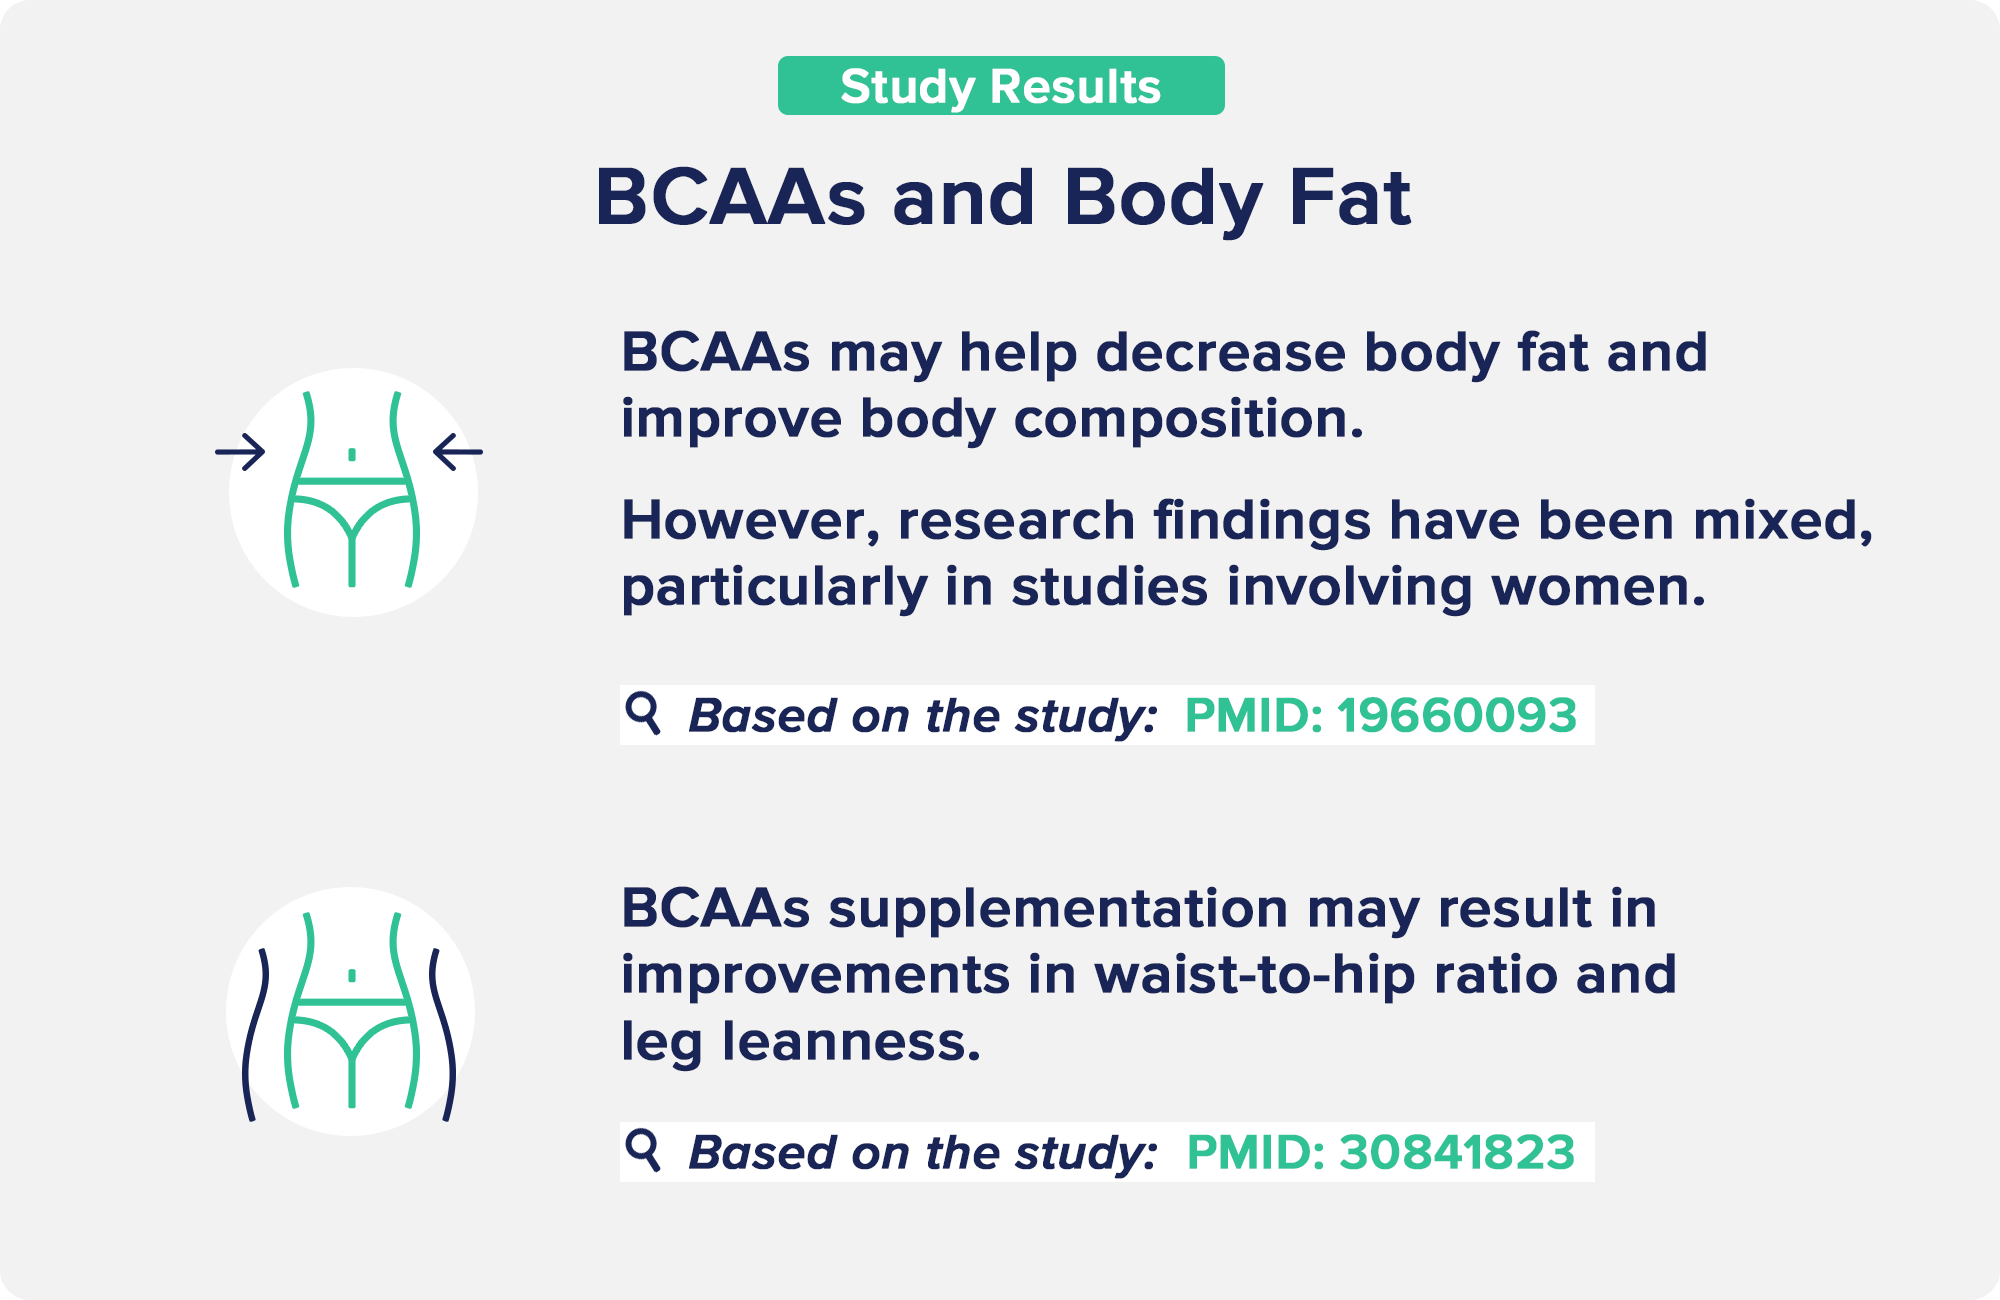 BCAAs and Body Fat